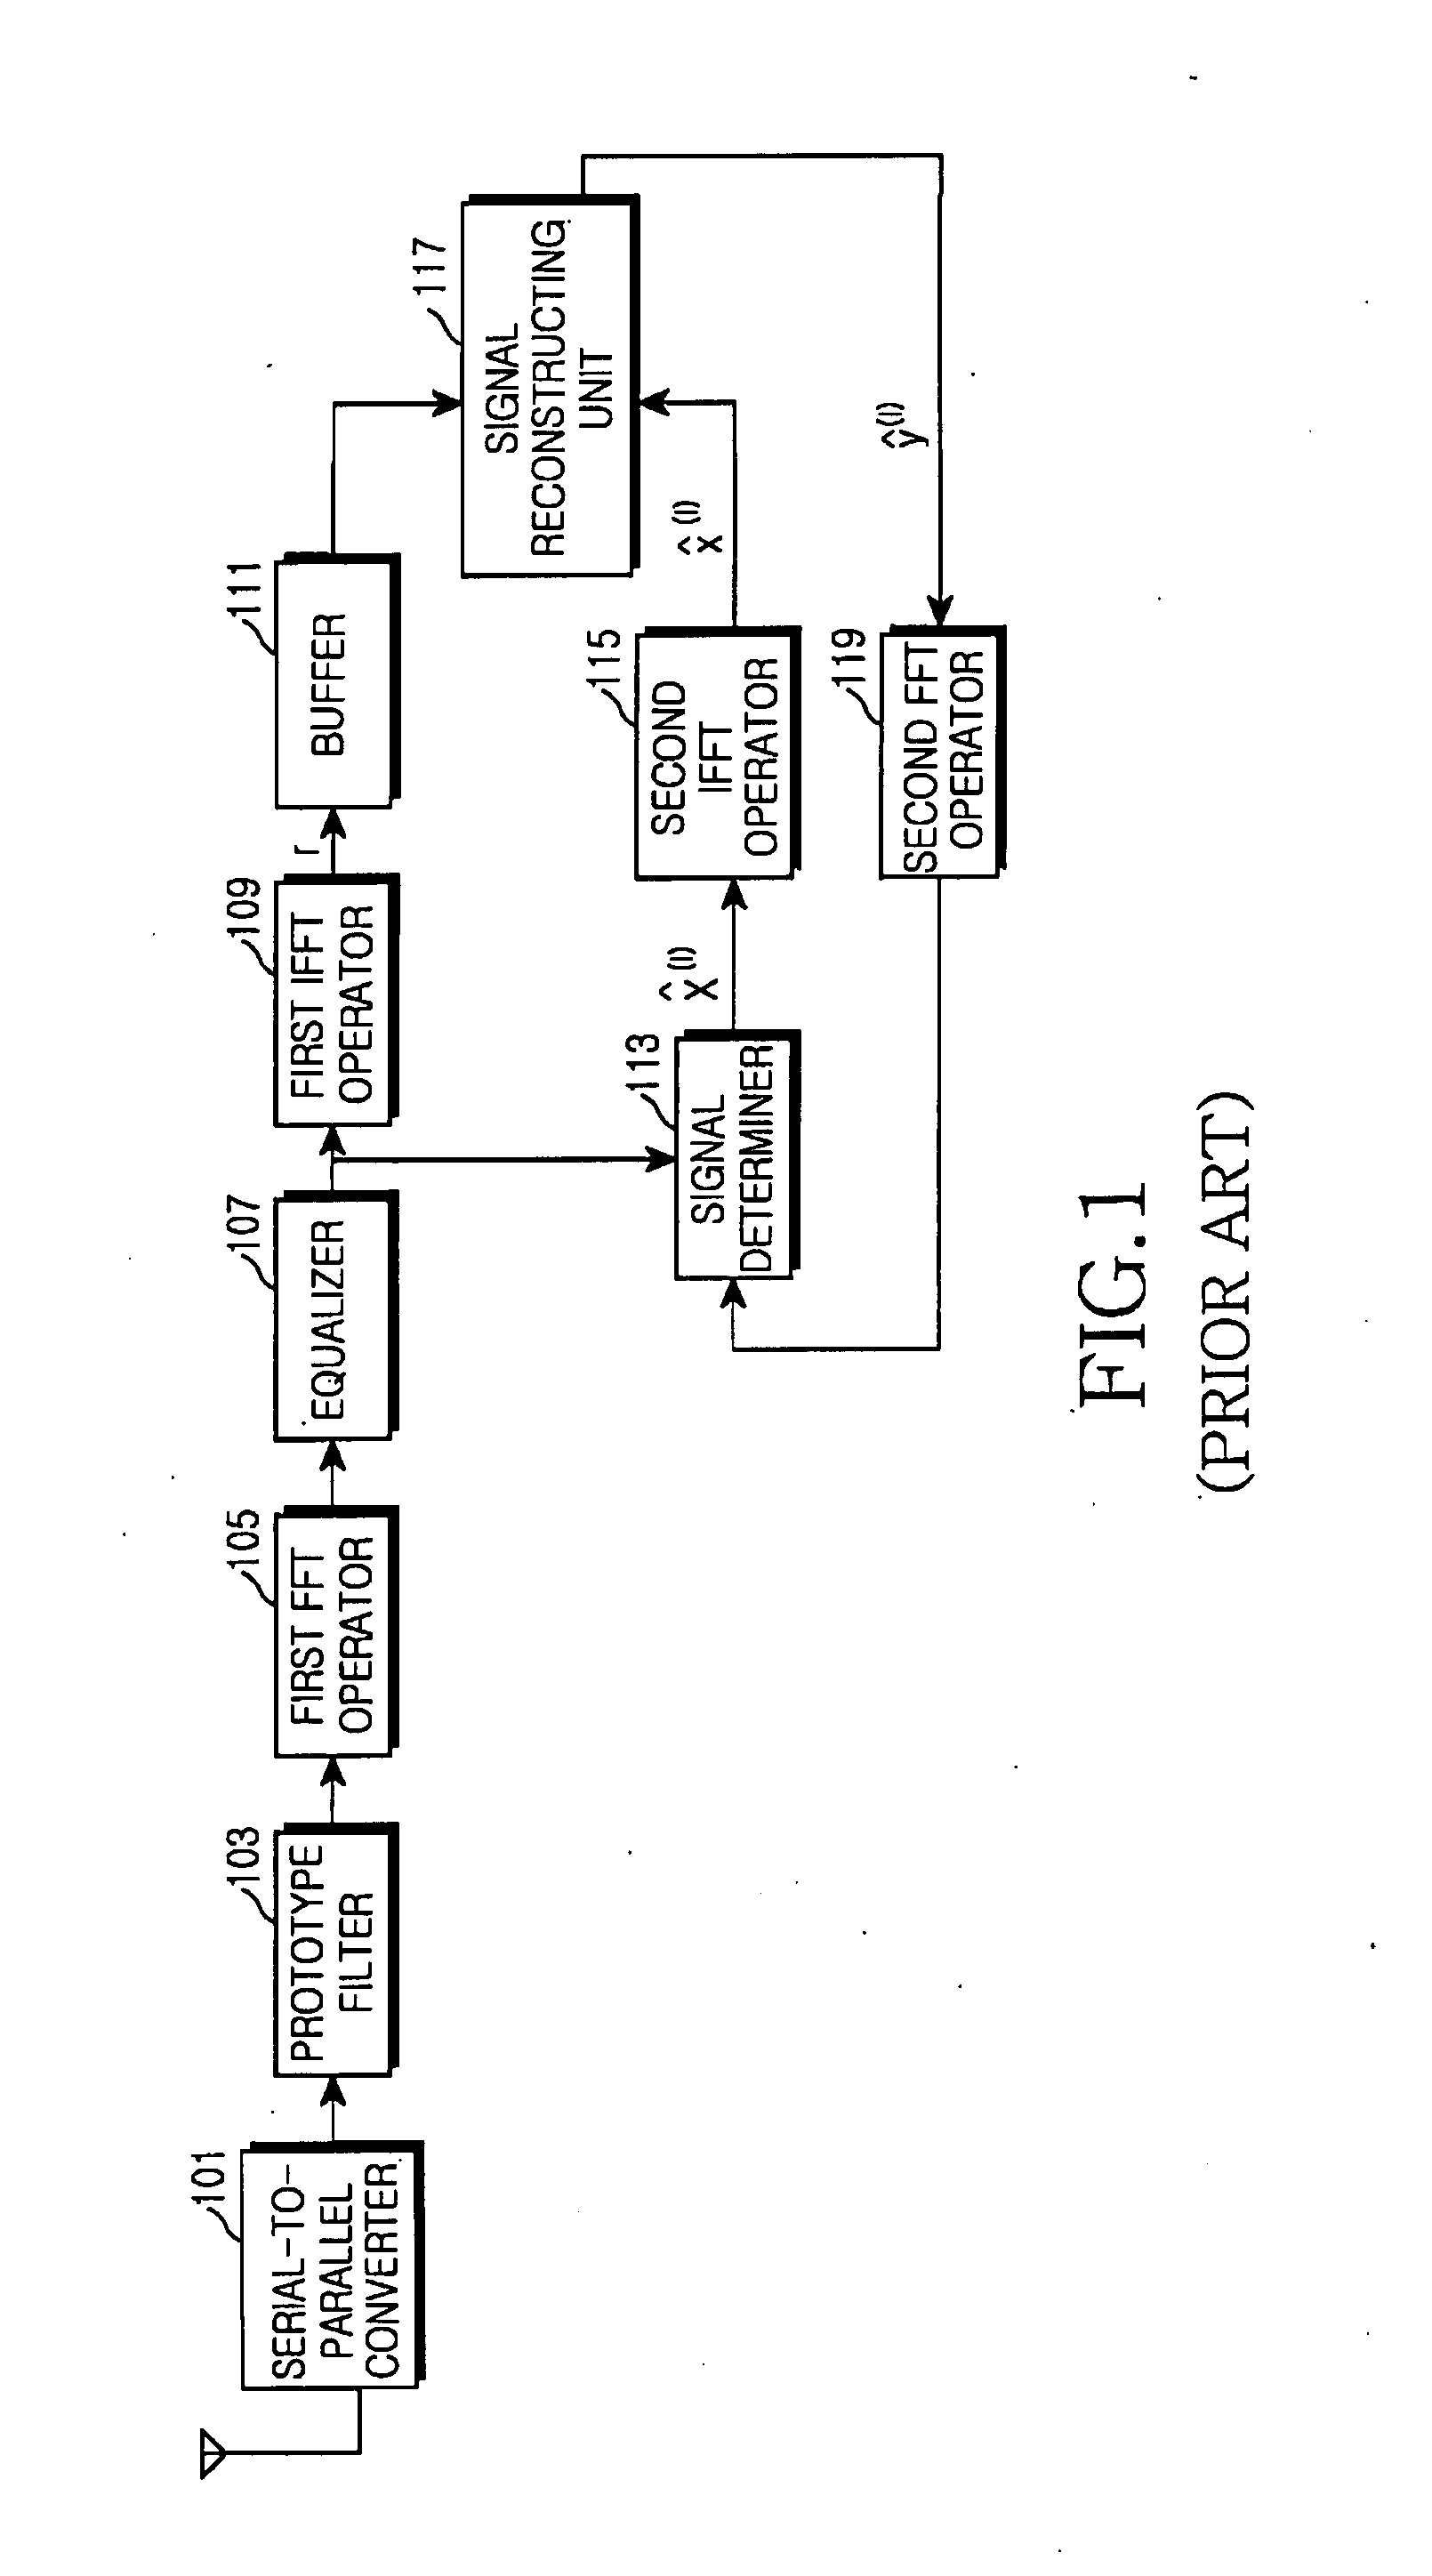 Apparatus for reducing clipping noise in a broadband wireless communication system and method thereof